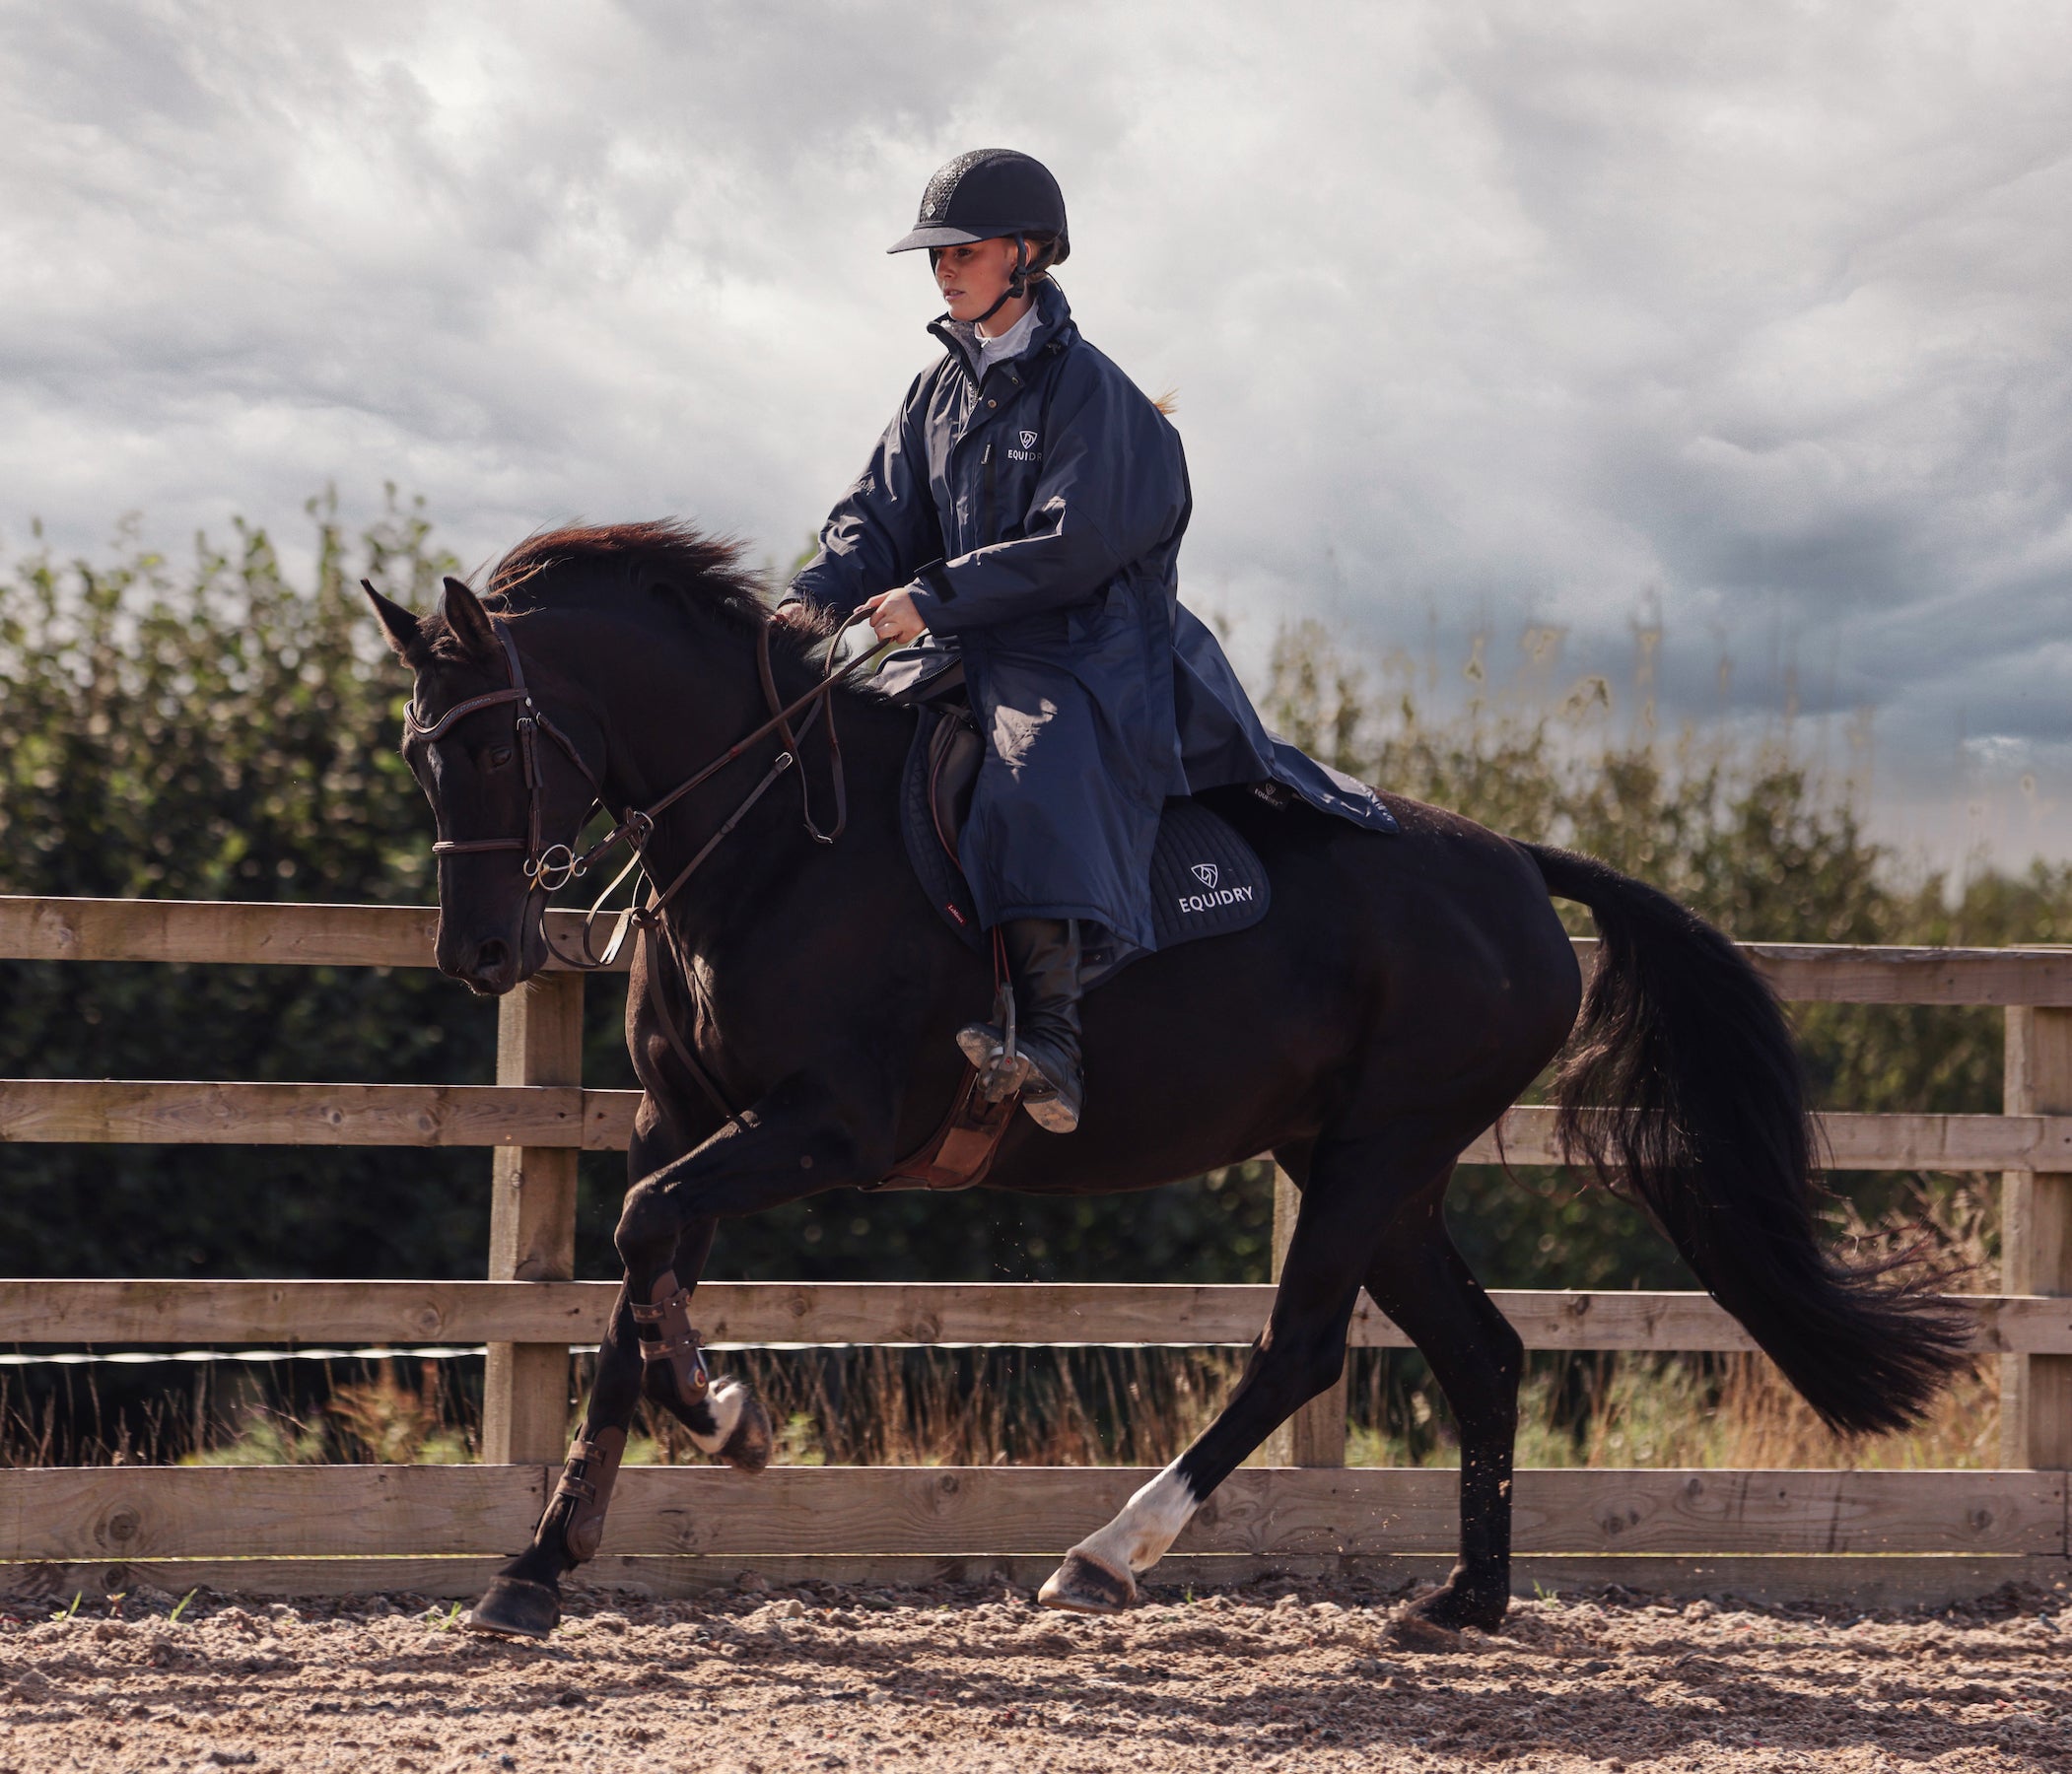 EQUIDRY Pro Ride Evolution  Equestrian oversized waterproof Horse Riding Coat in Navy modelled by rider training  for competition